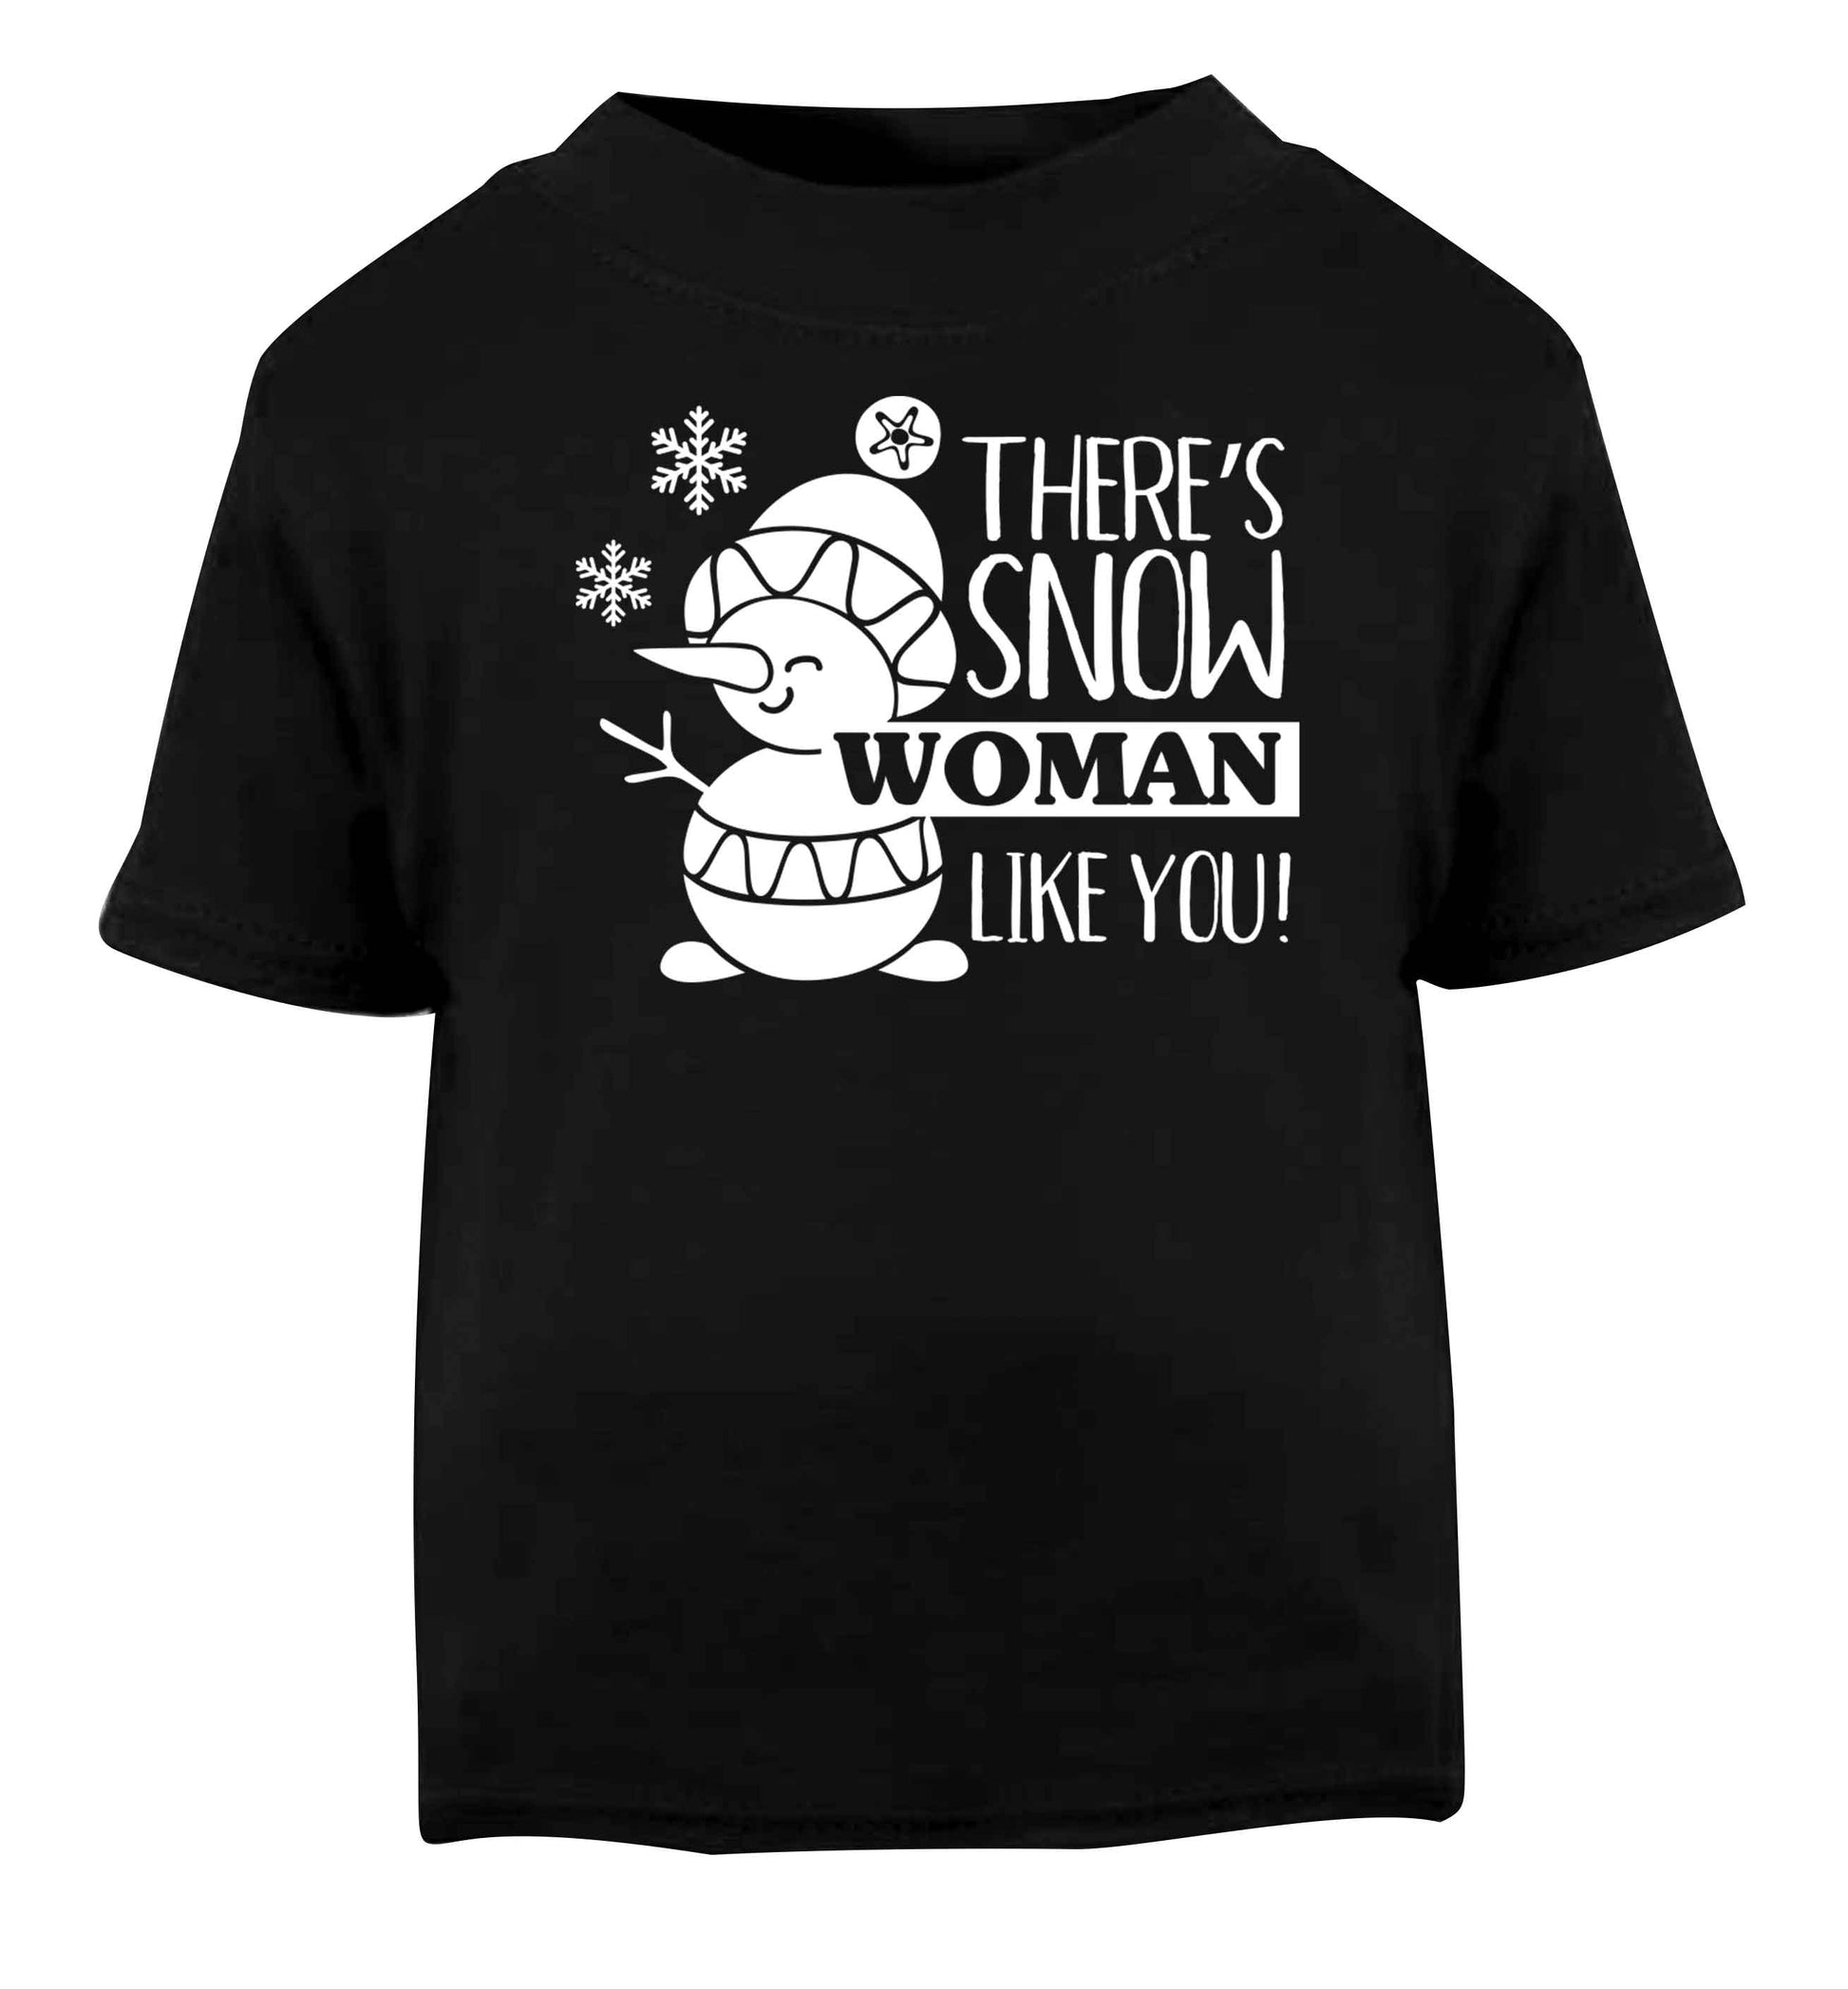 There's snow woman like you Black baby toddler Tshirt 2 years